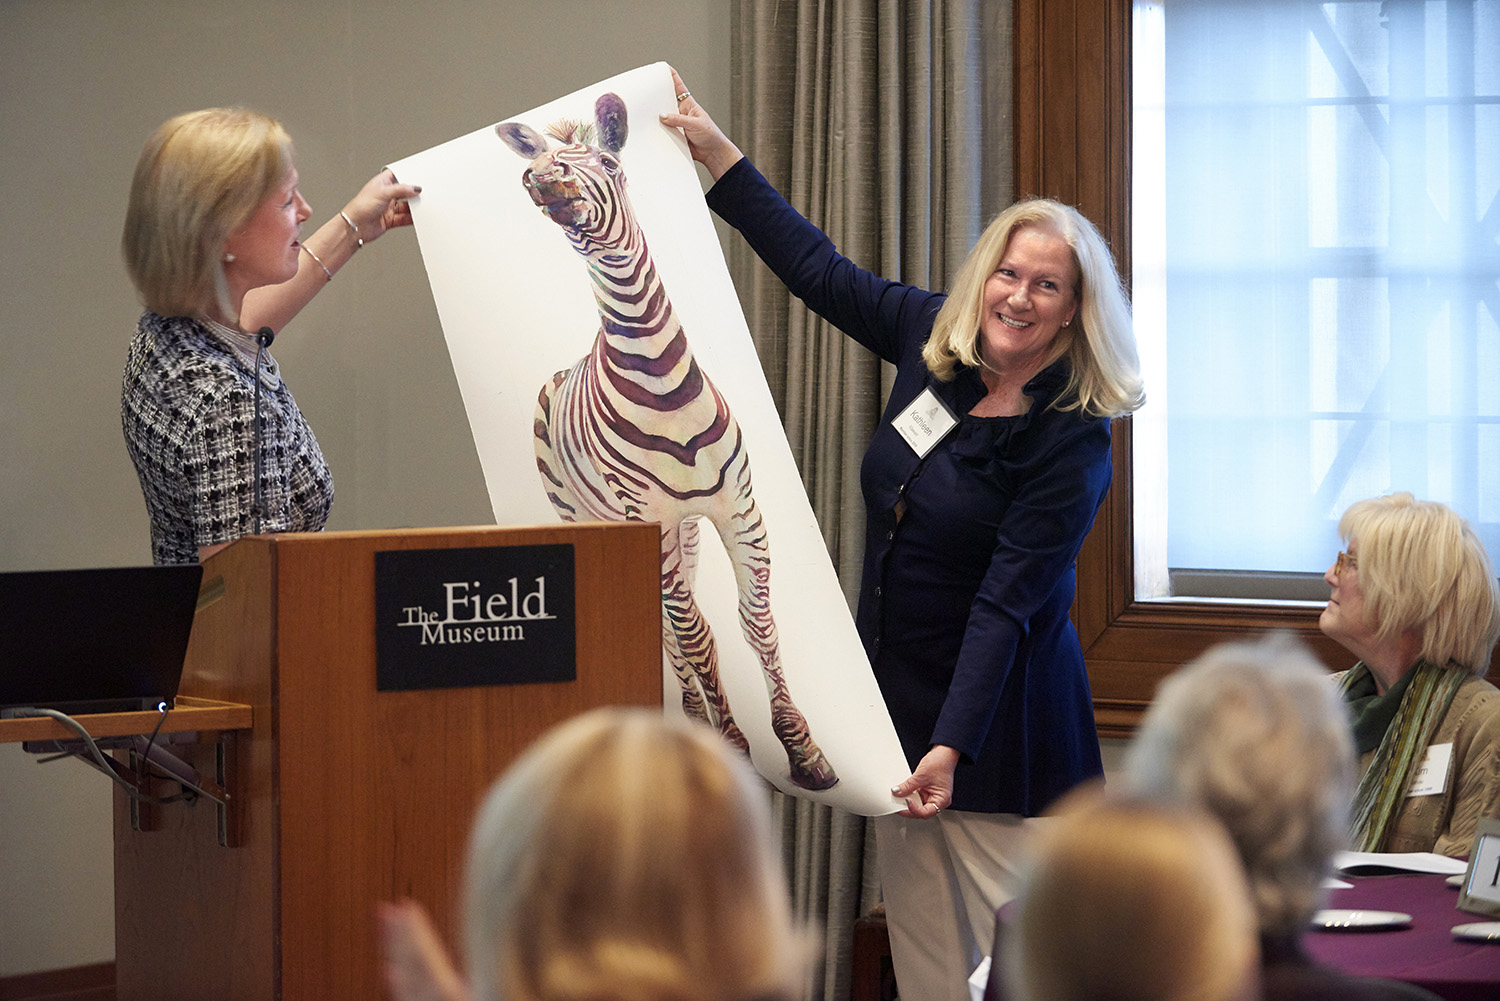 Two women hold up a painting of a zebra by Field Museum artist-in-residence Peggy McNamara, while standing behind a podium with the Museum’s logo on it. Other Women’s Board members, seated at tables, look on.